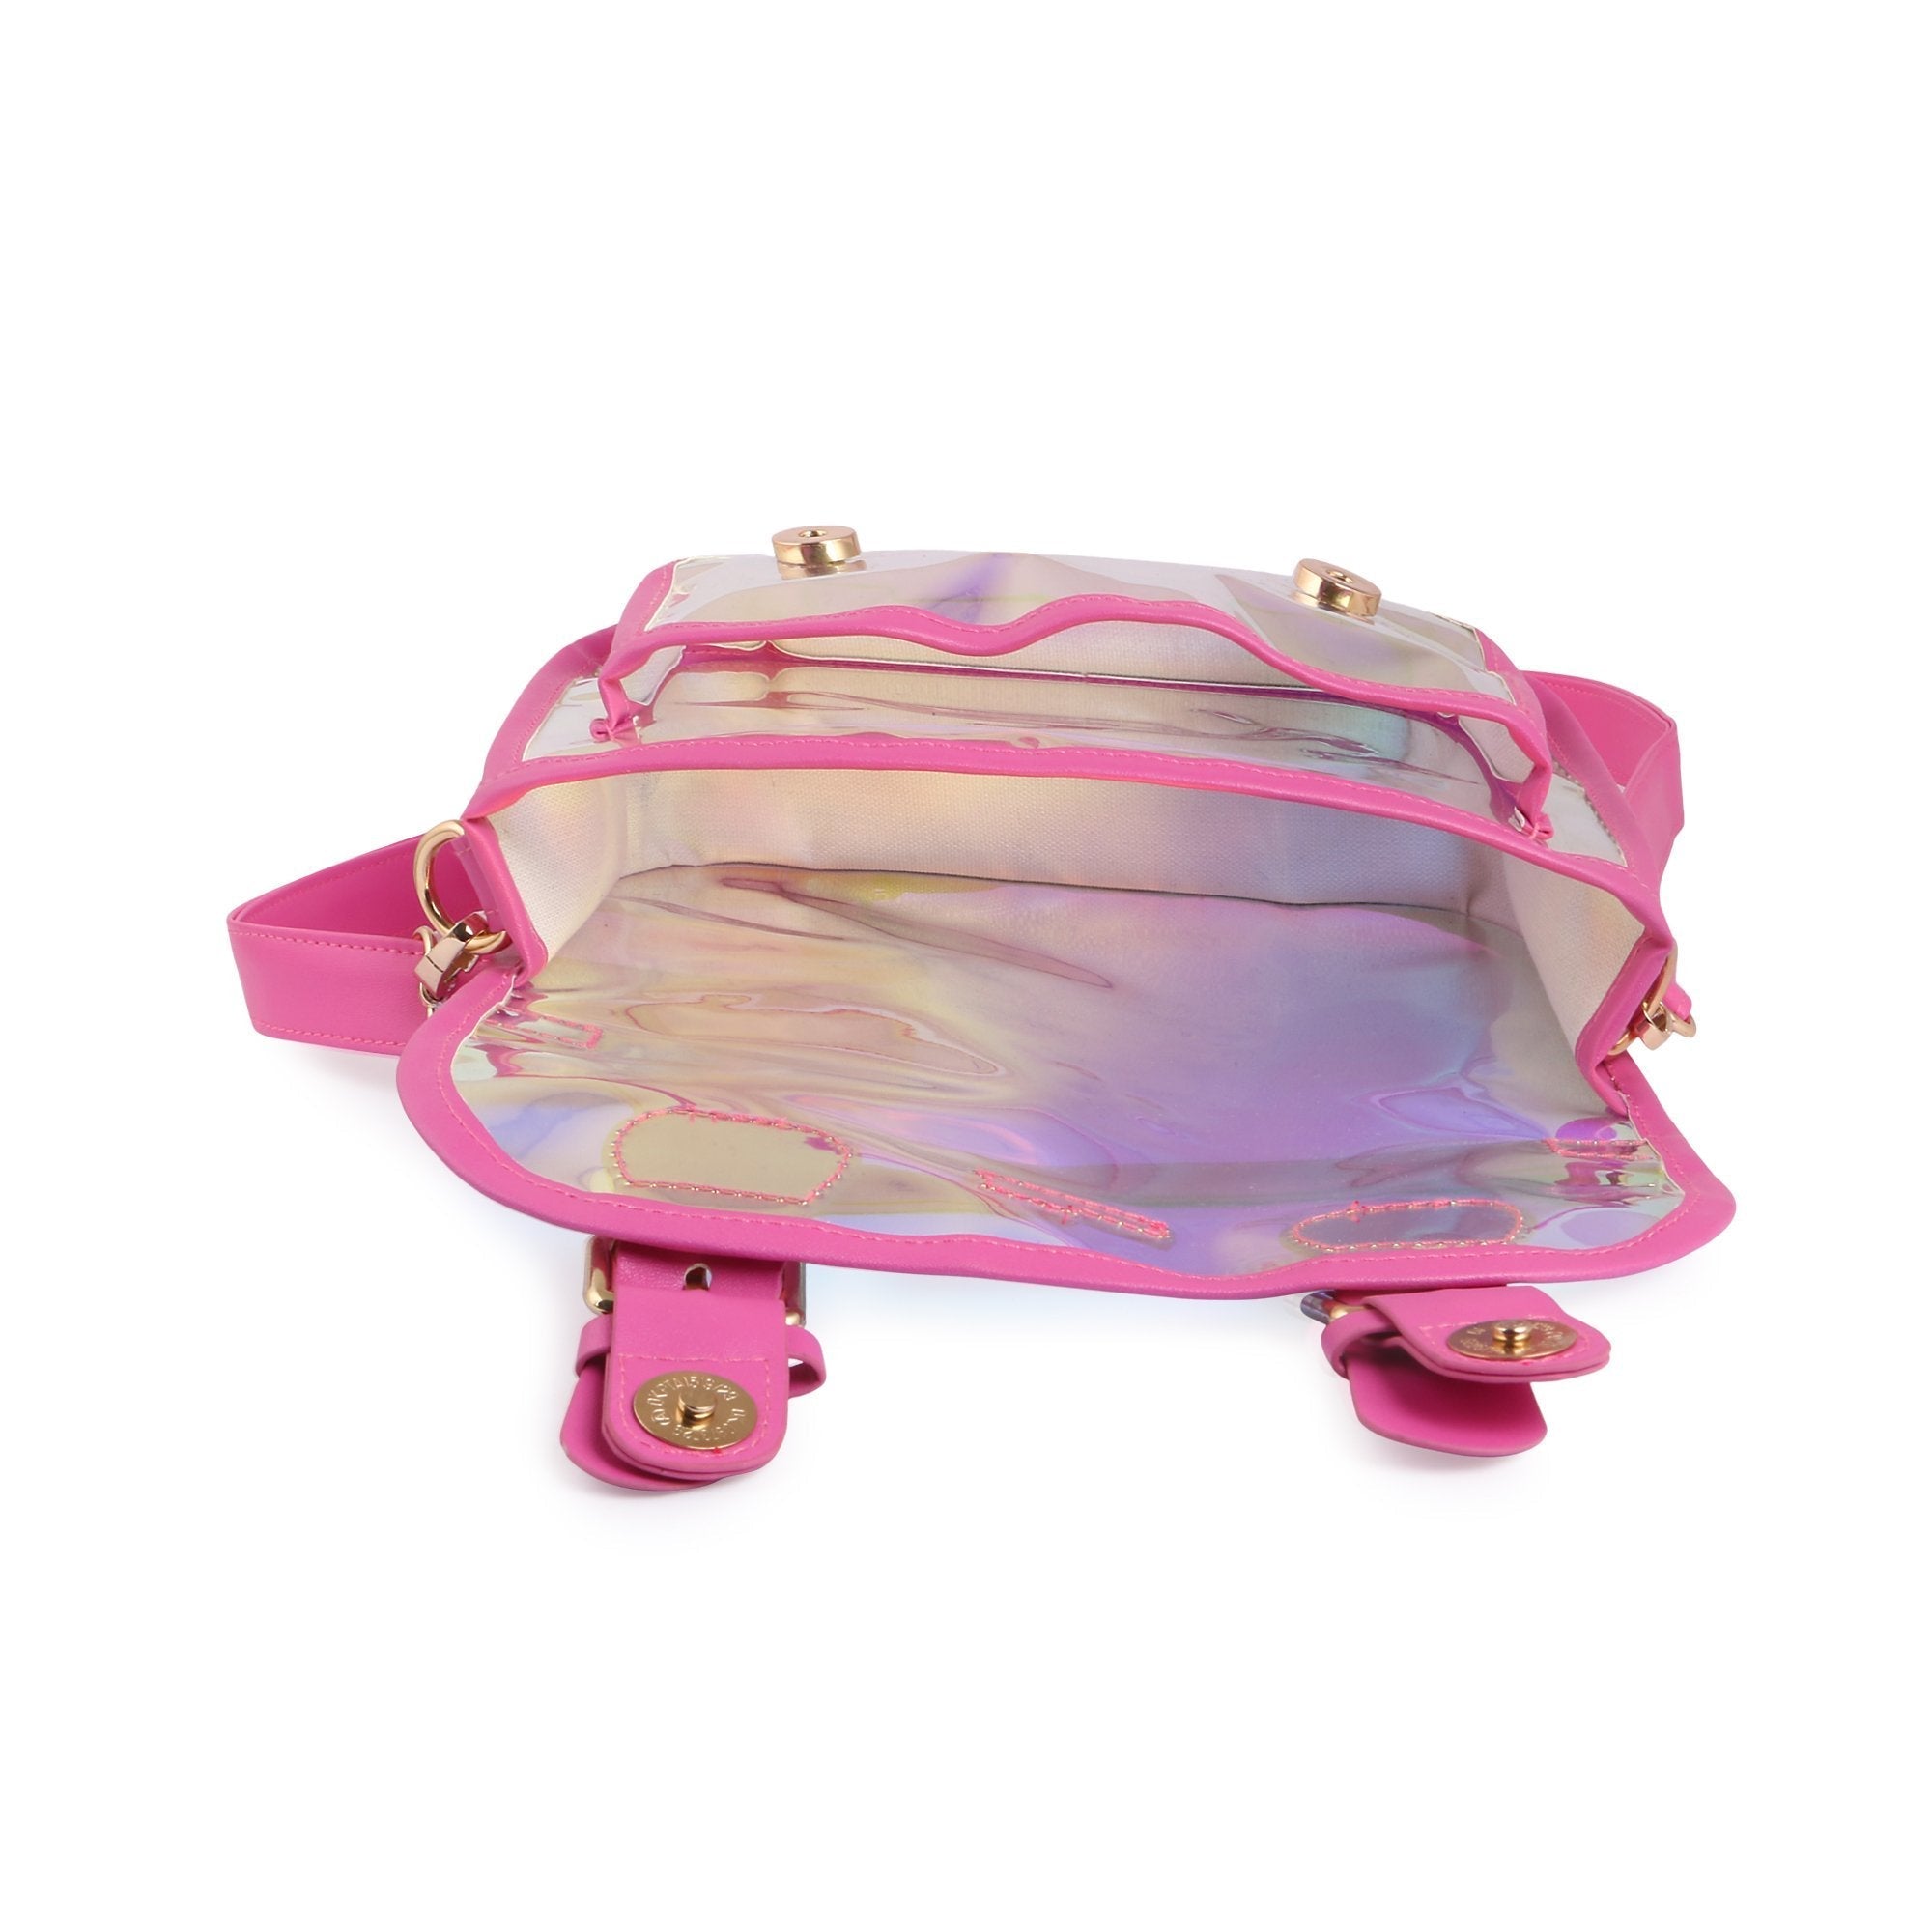 HL Shiny Sling Bag Pink With Personalization